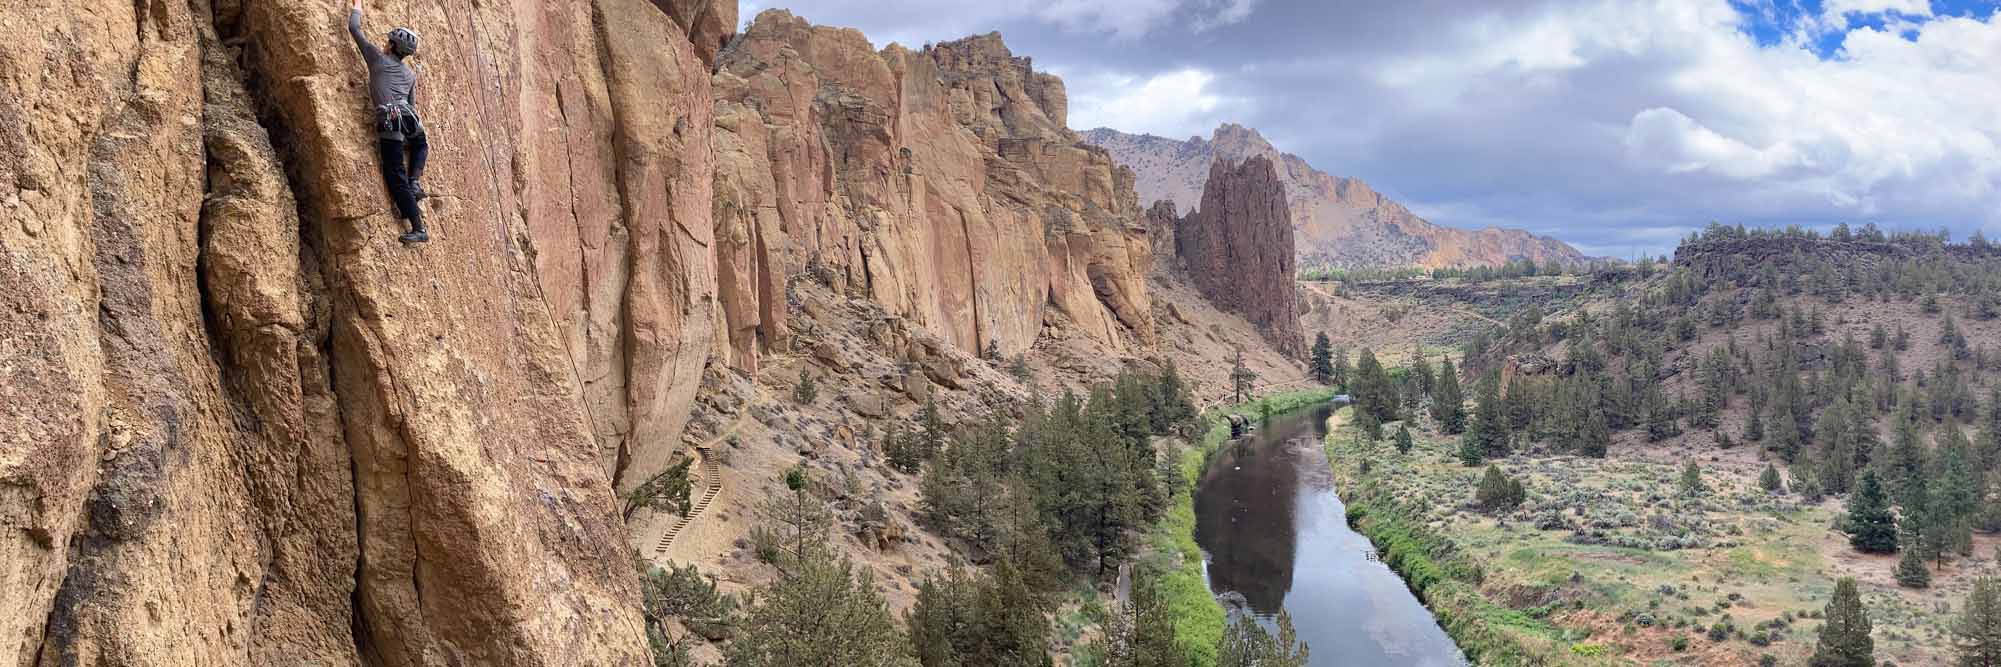 Smith Rock State Park is the birthplace of sport climbing in the U.S.